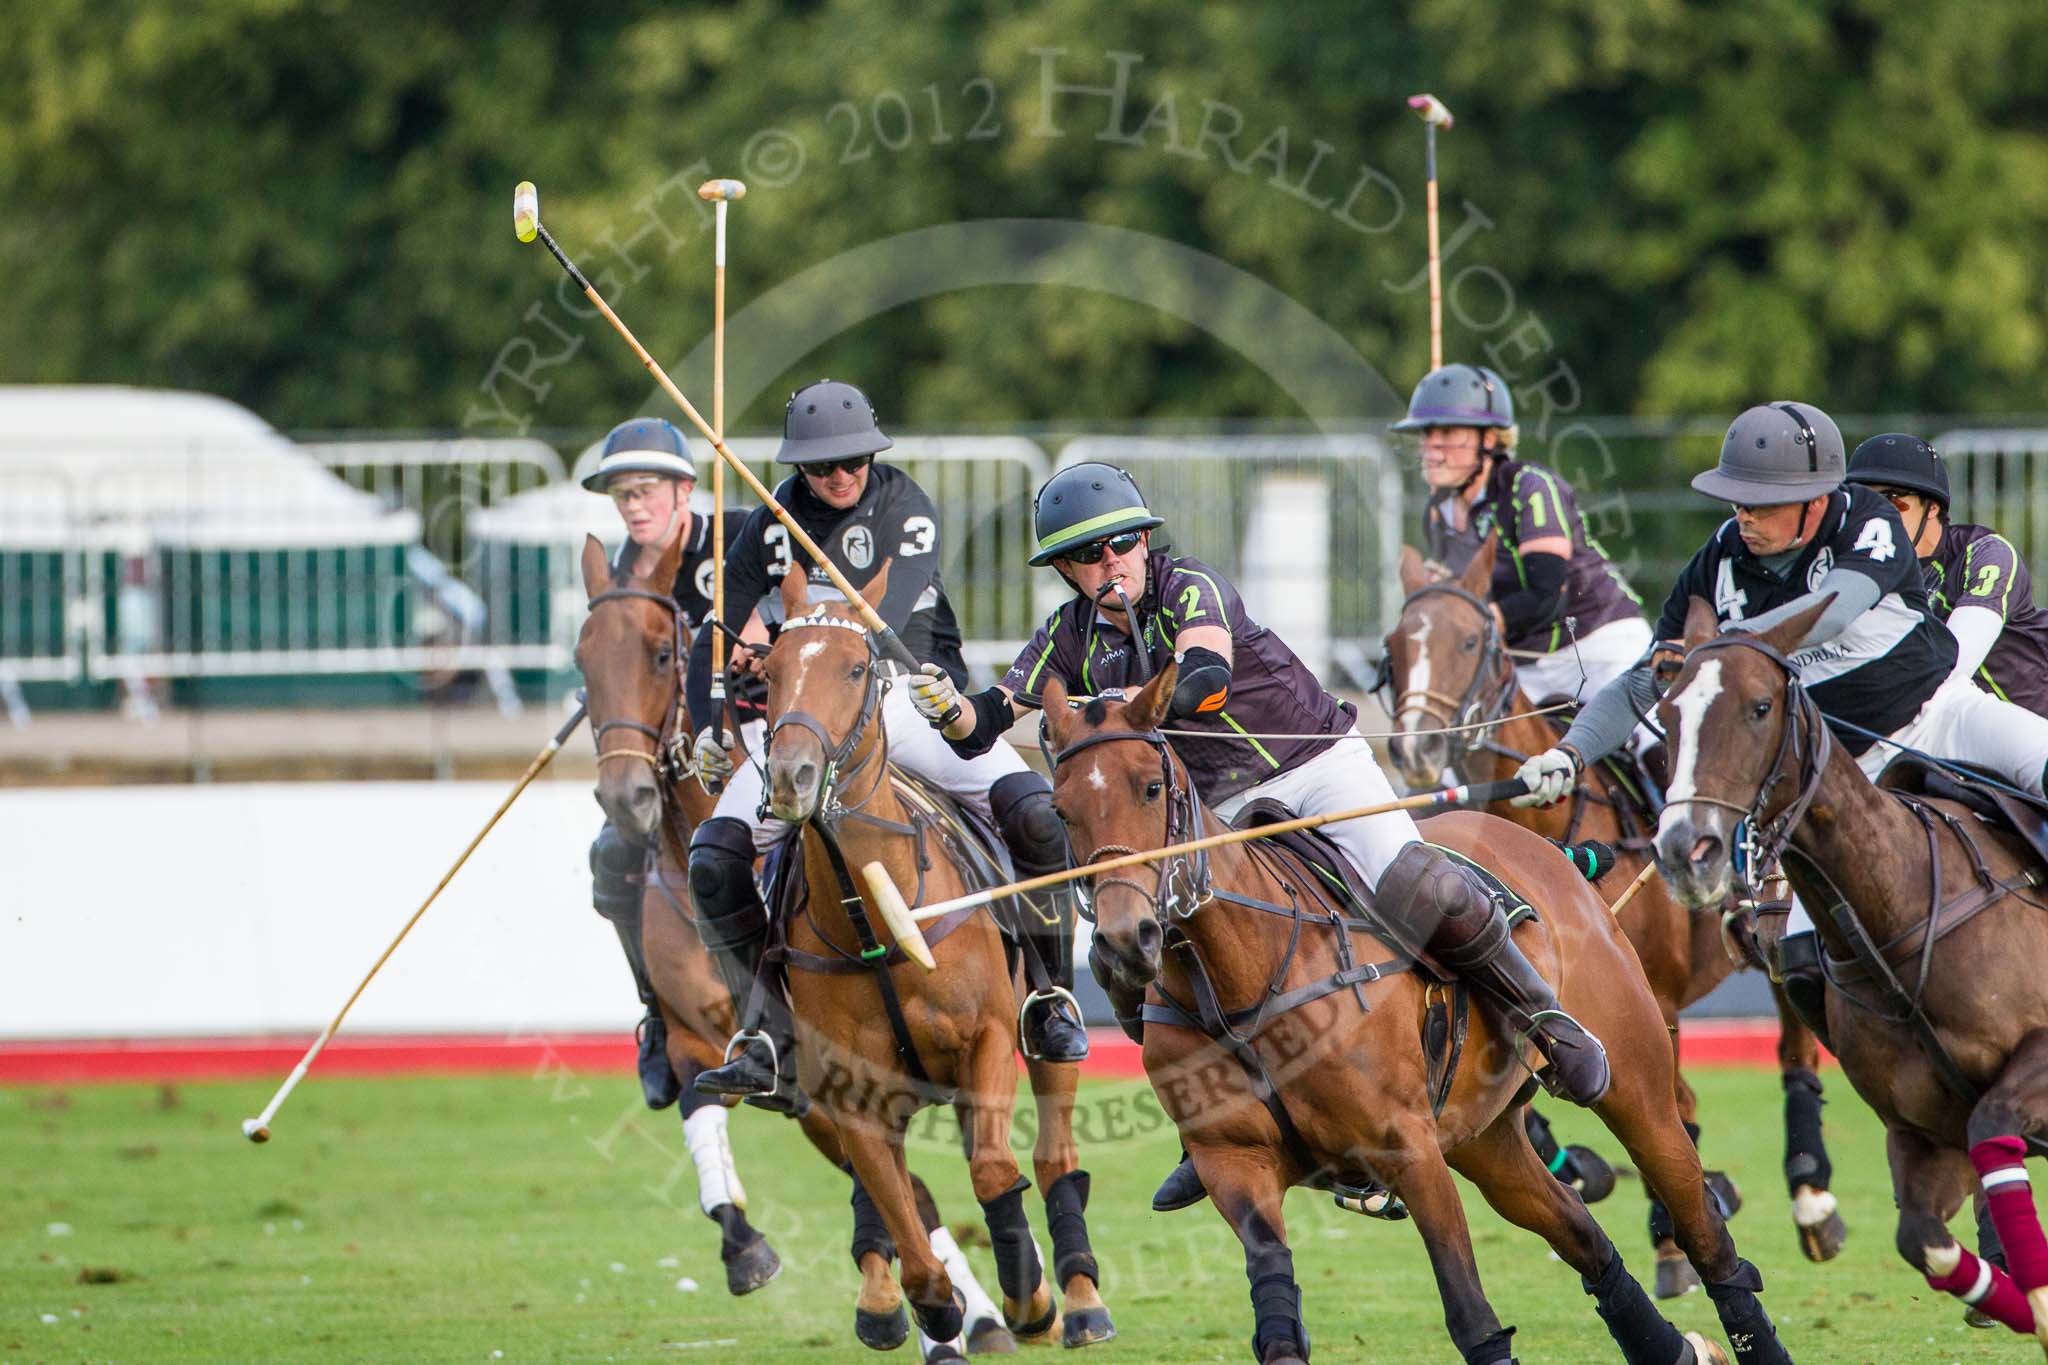 DBPC Polo in the Park 2012: Rigby & Rigby #2, Steve Rigby, and La Golondrina #4, Matias Carrique..
Dallas Burston Polo Club,
Stoneythorpe Estate,
Southam,
Warwickshire,
United Kingdom,
on 16 September 2012 at 17:37, image #287